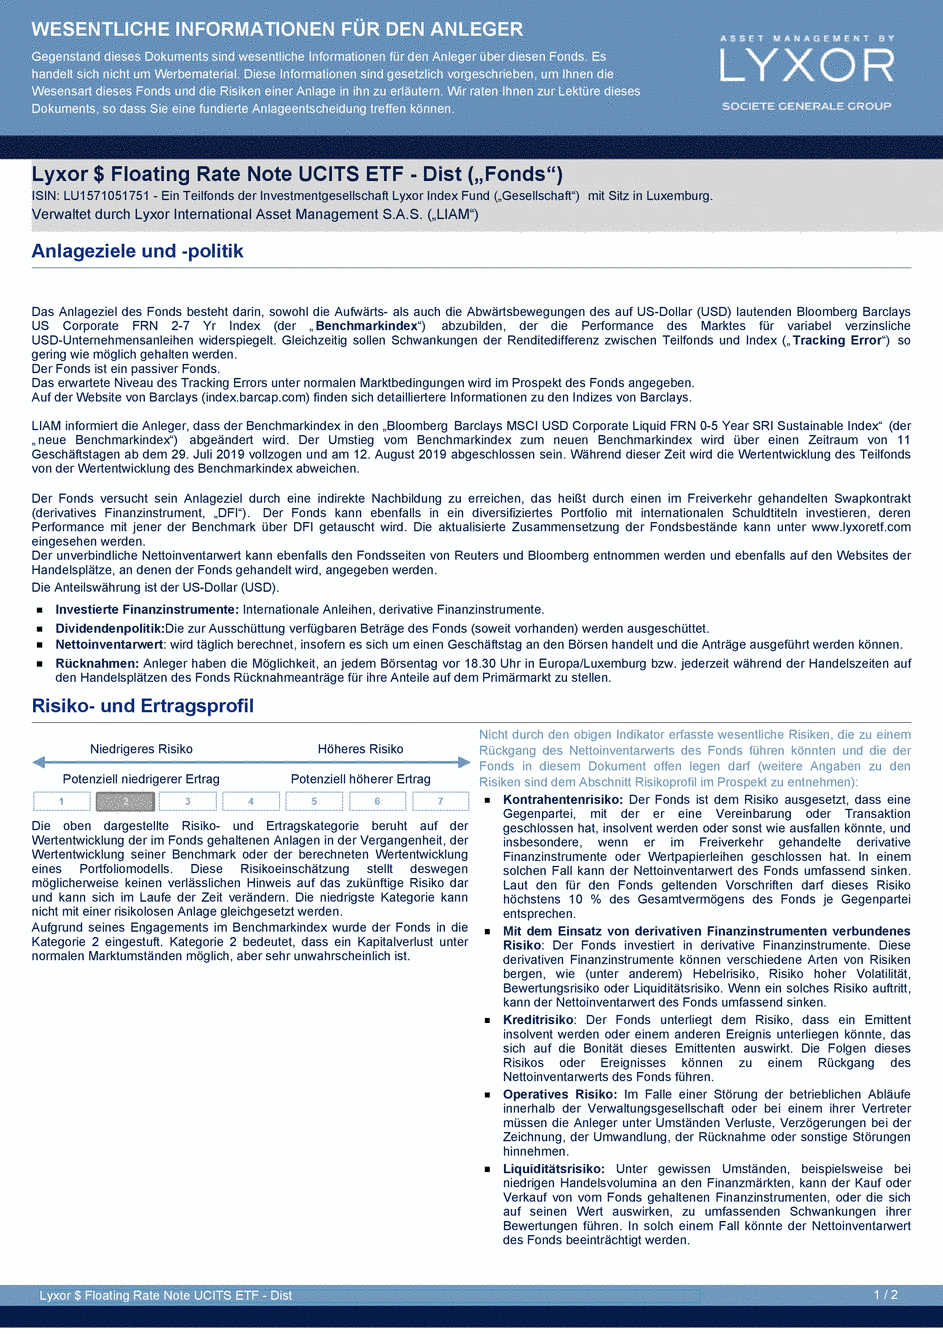 DICI Lyxor $ Floating Rate Note UCITS ETF - Dist - 29/07/2019 - Allemand